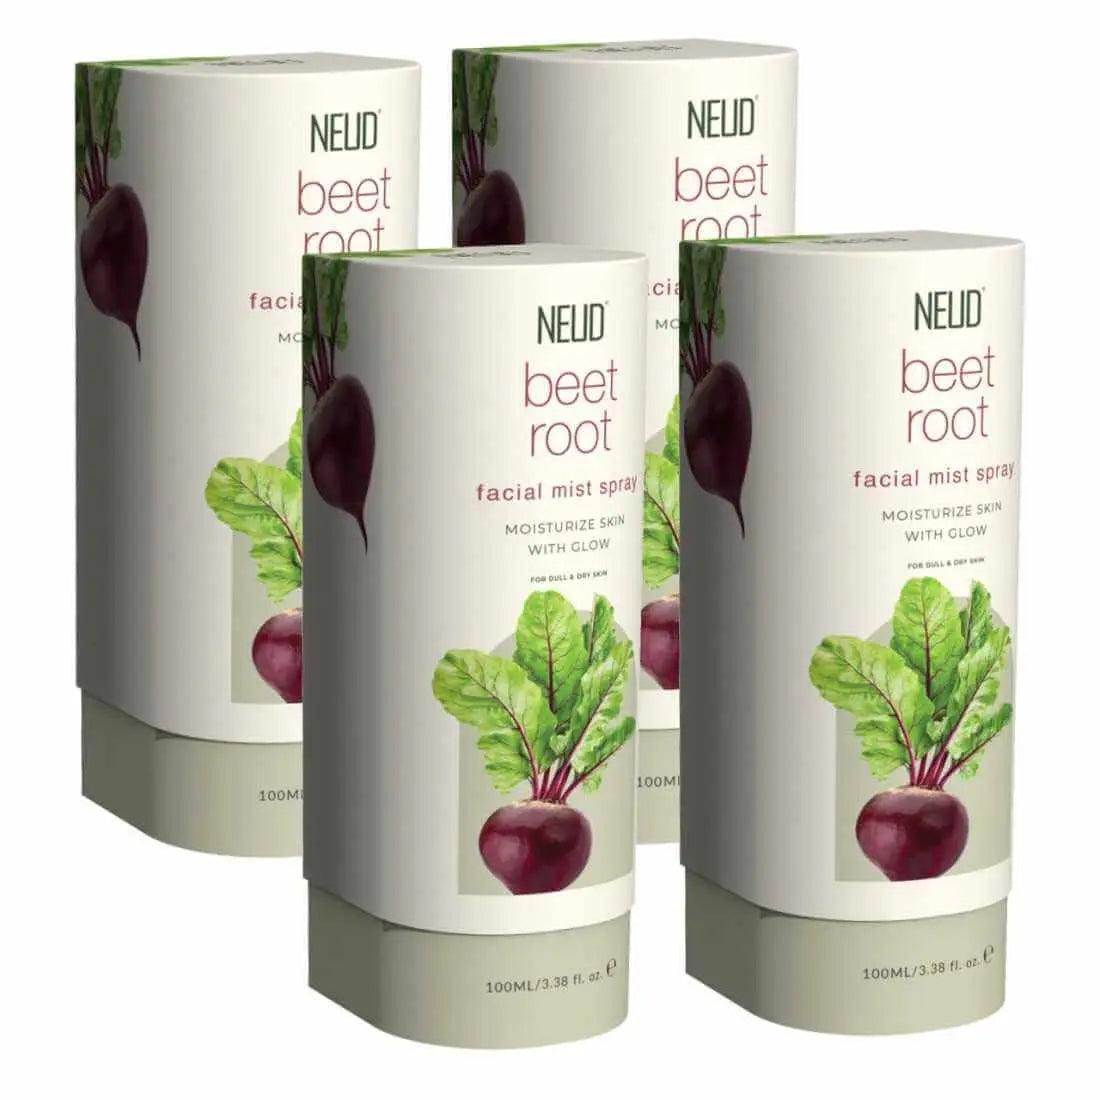 NEUD Beet Root Facial Mist Spray For Dull and Dry Skin - 100 ml 9559682313416